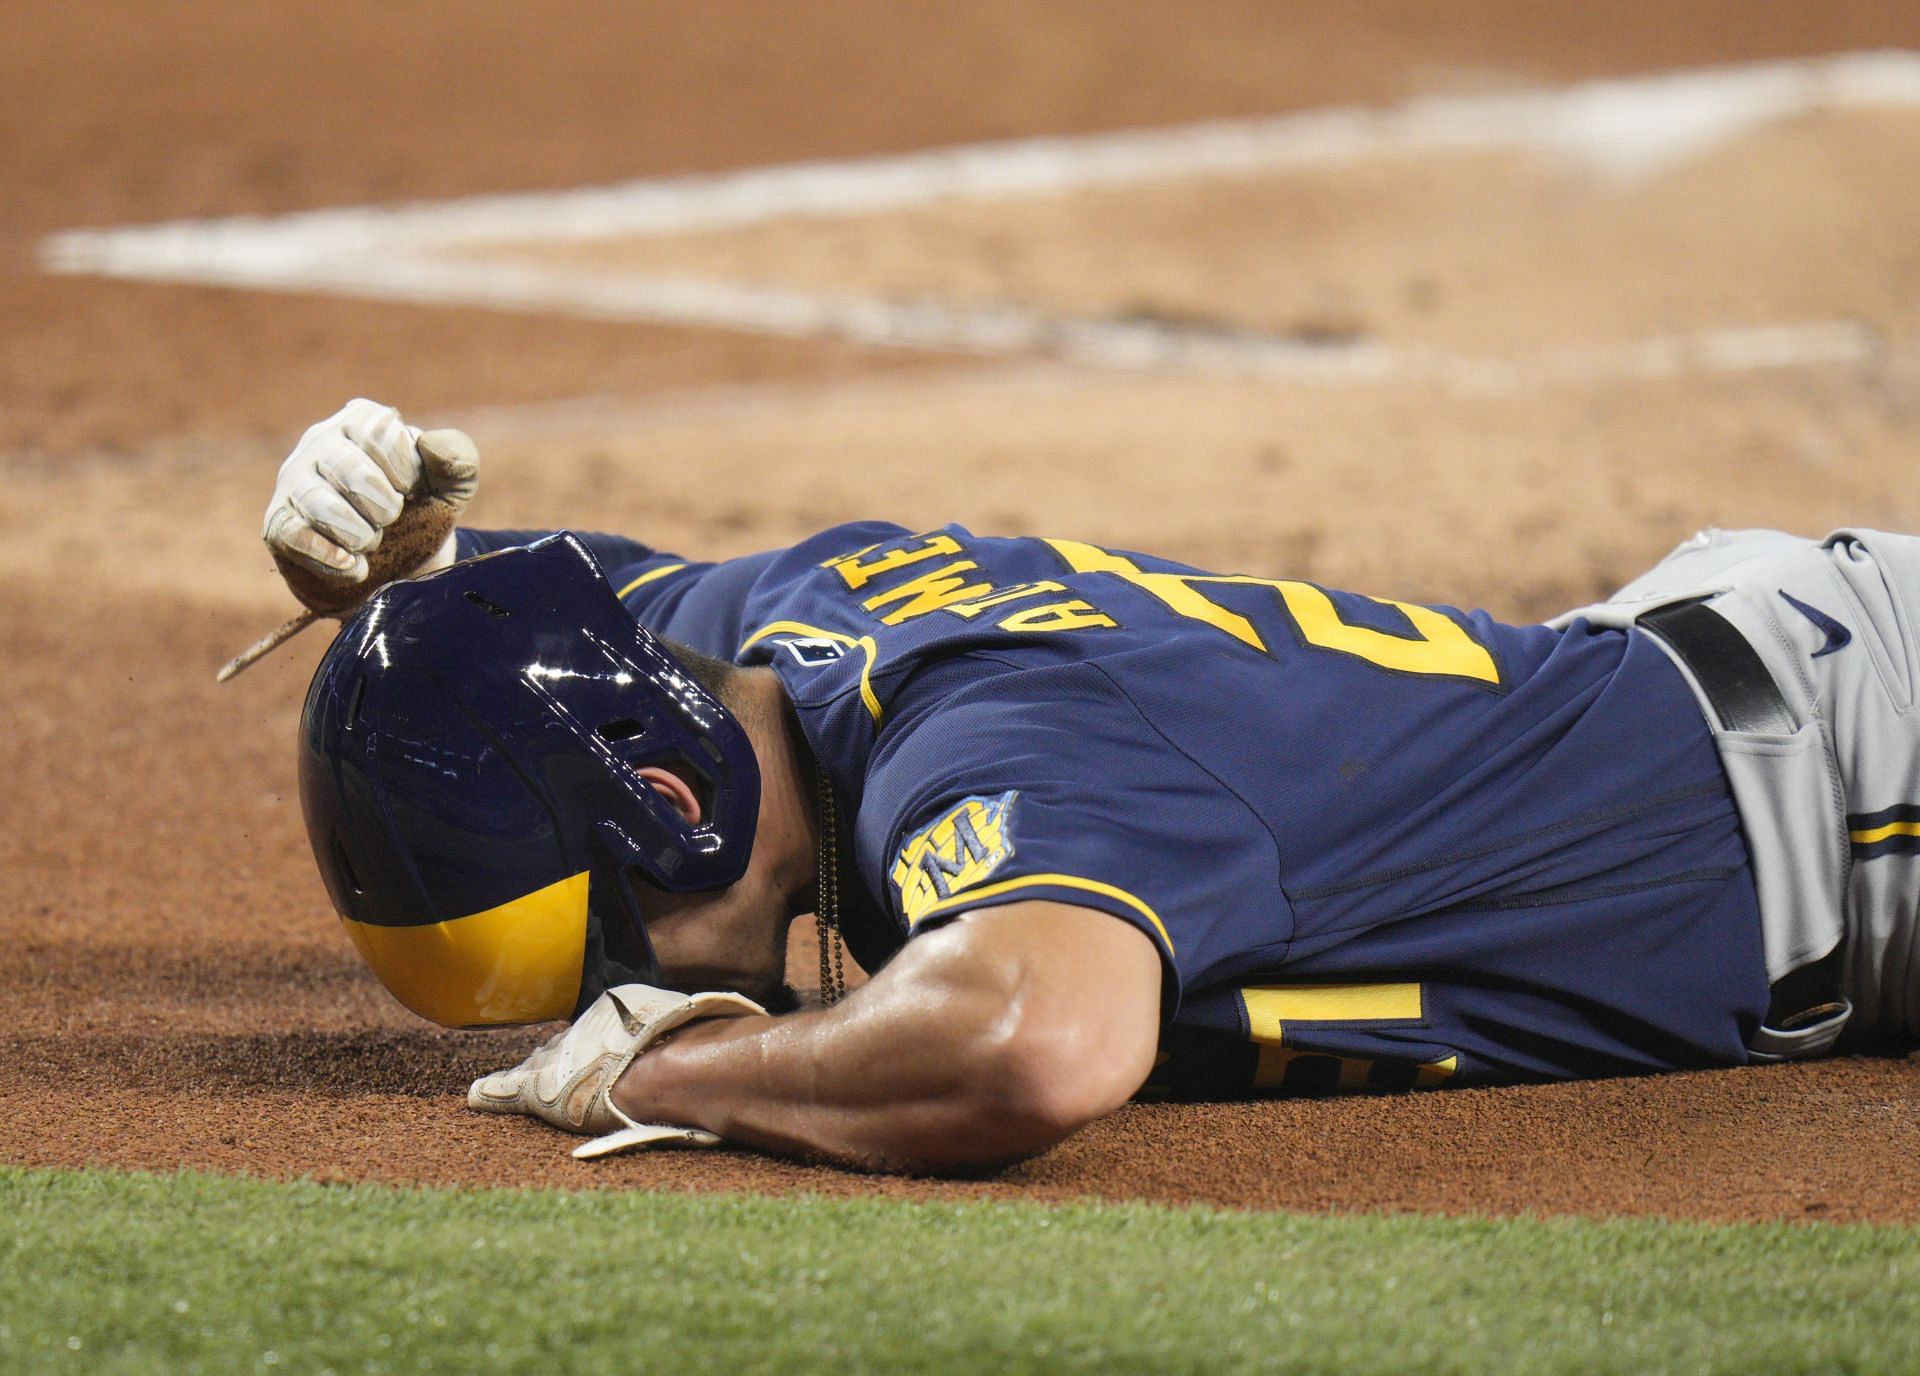 Willy Adames Injury: Health status and expected recovery period for Brewers  star after scary accident